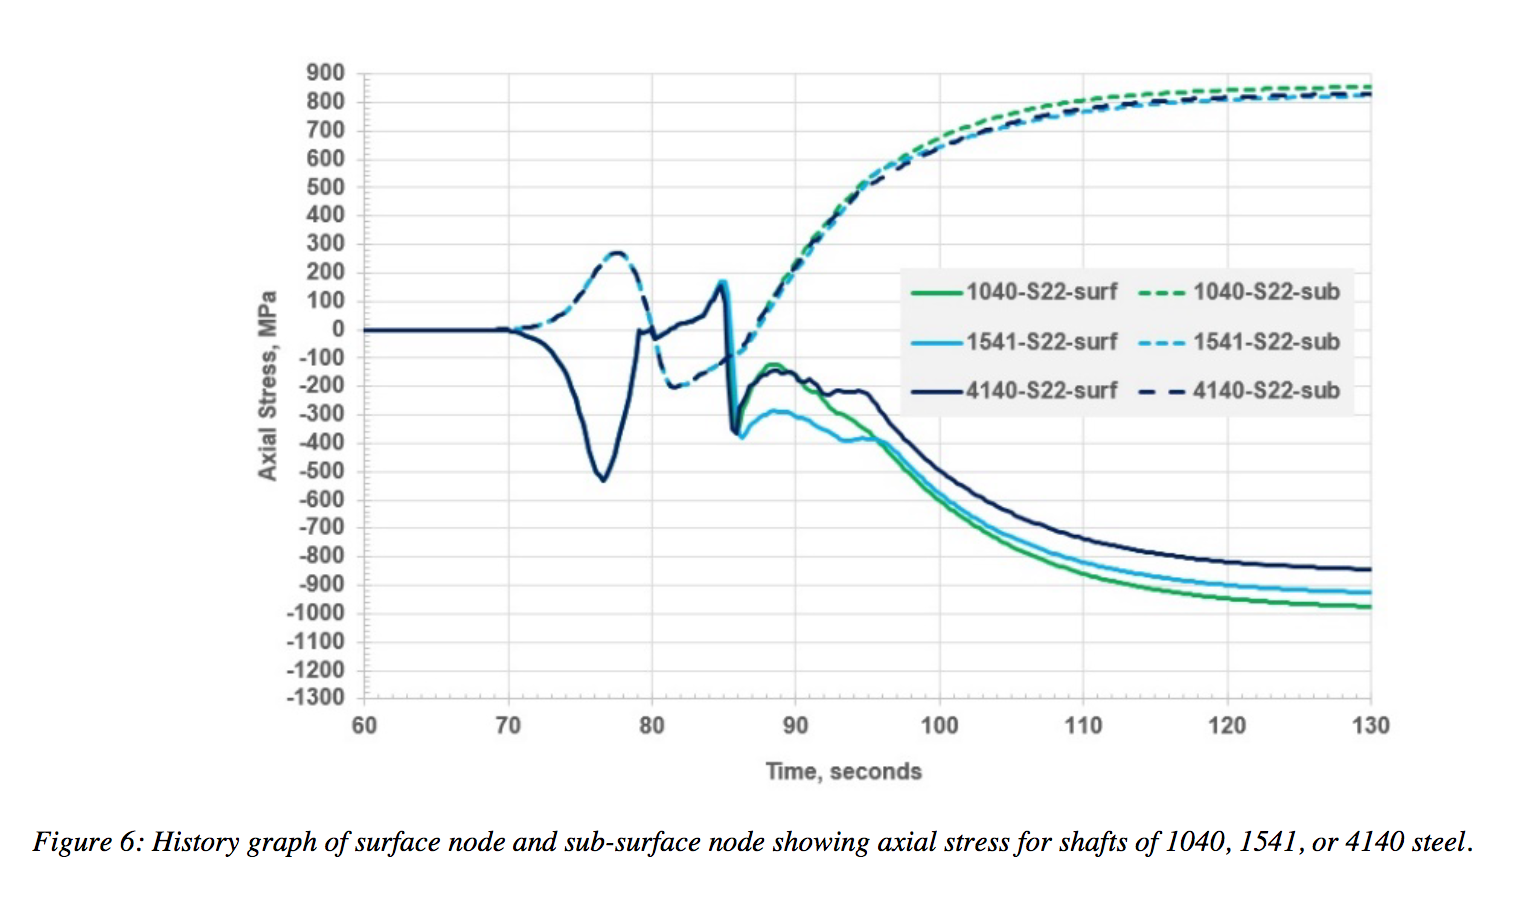 Fluxtrol | Effect of Steel Hardenability on Stress Formation in an Induction Hardened Axle Shaft - Figure 6: History graph of surface node and sub-surface node showing axial stress for shafts of 1040, 1541, or 4140 steel